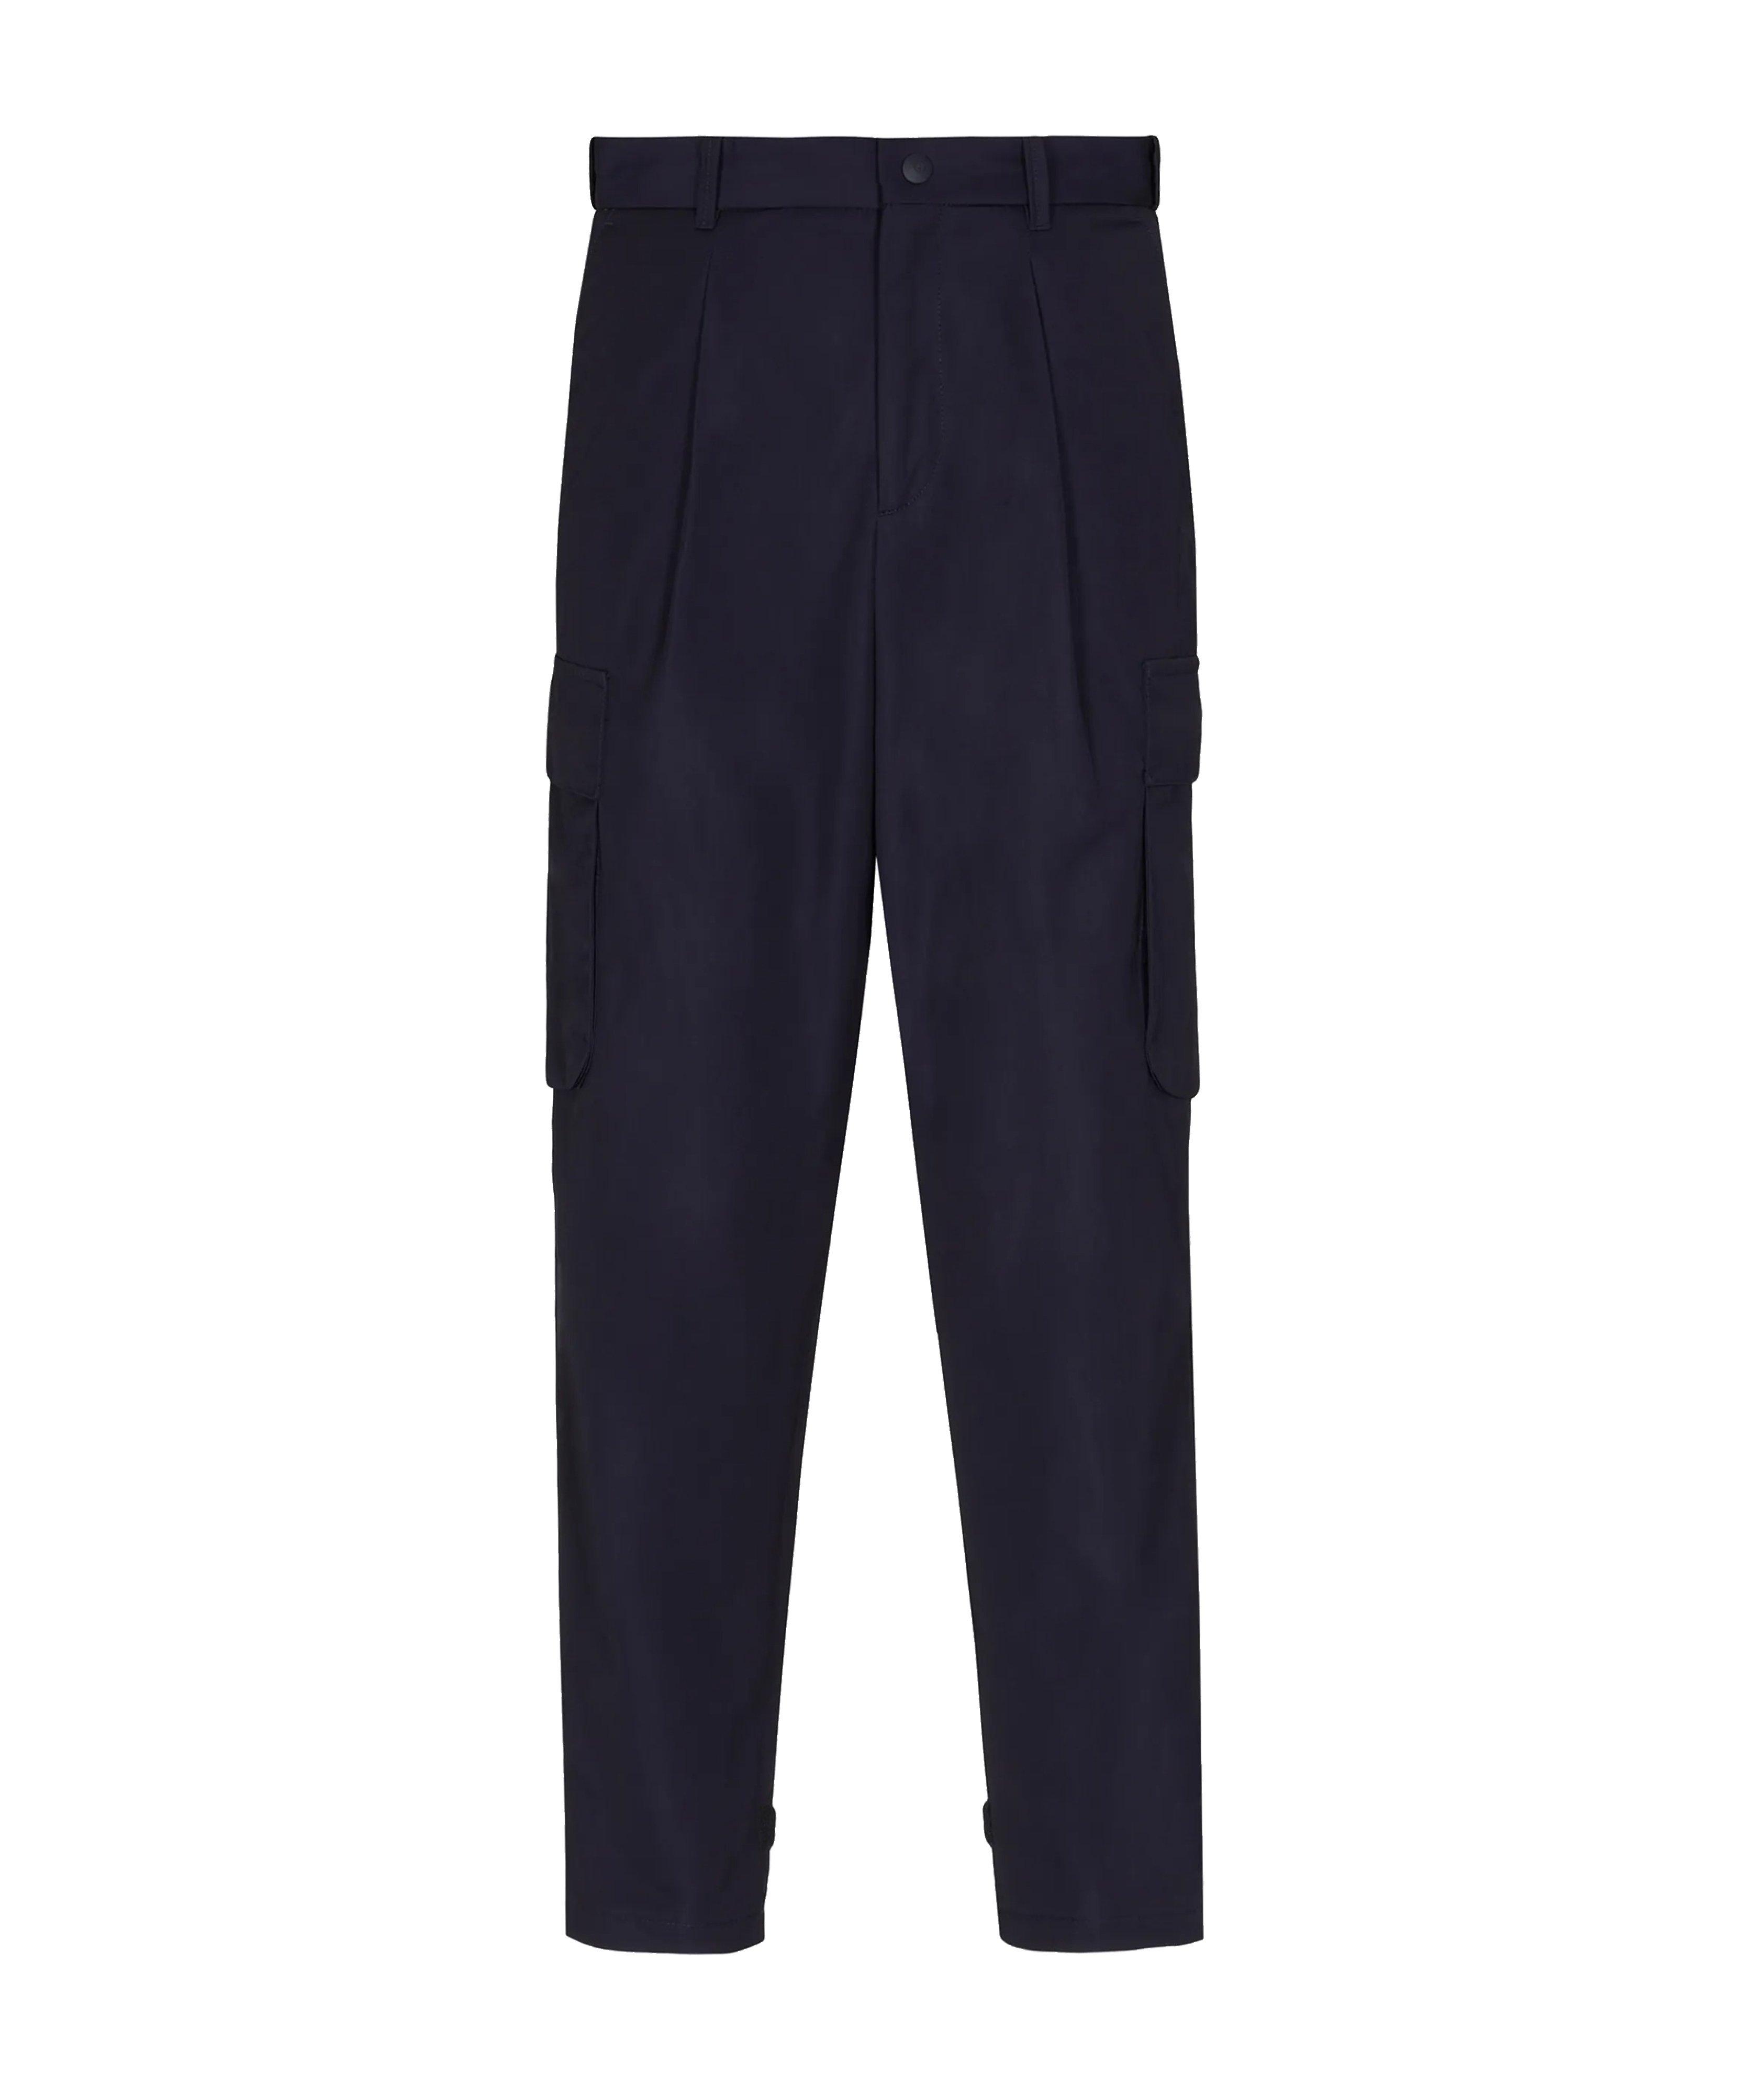 Technical Twill Cargo Trousers image 0